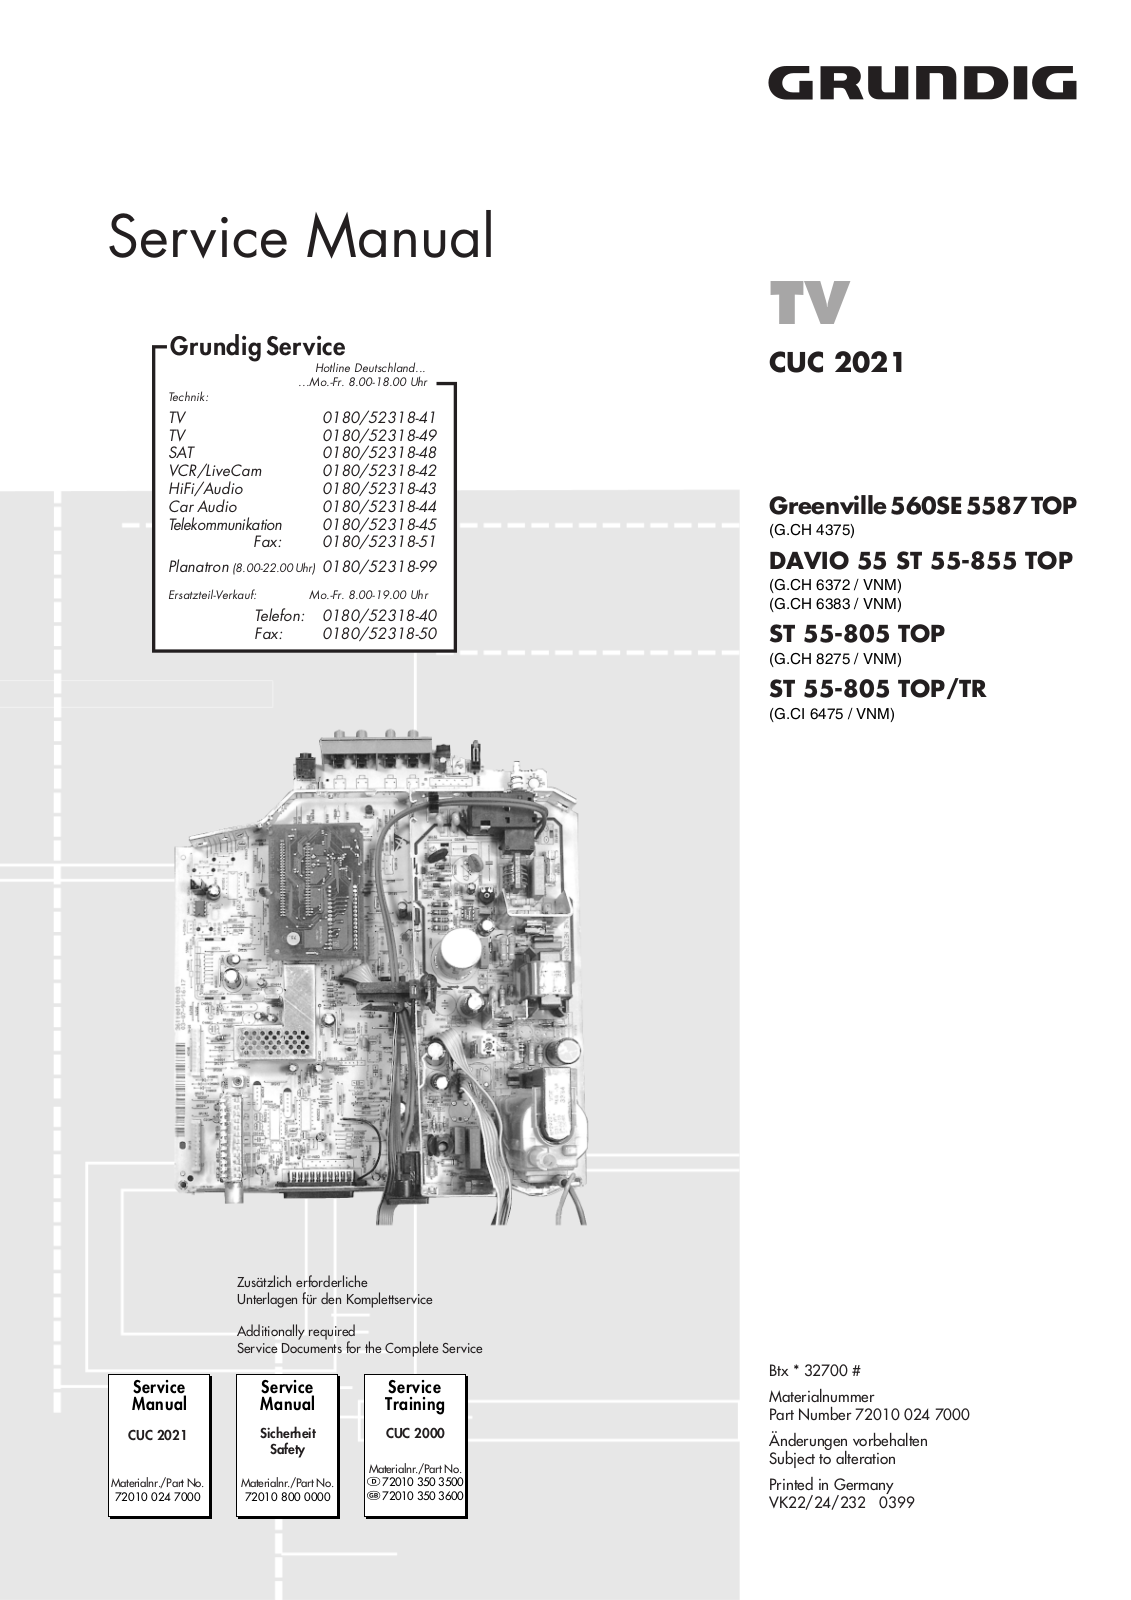 Grundig ST 55-805 TOP-TR, ST 55-805 TOP Service Manual